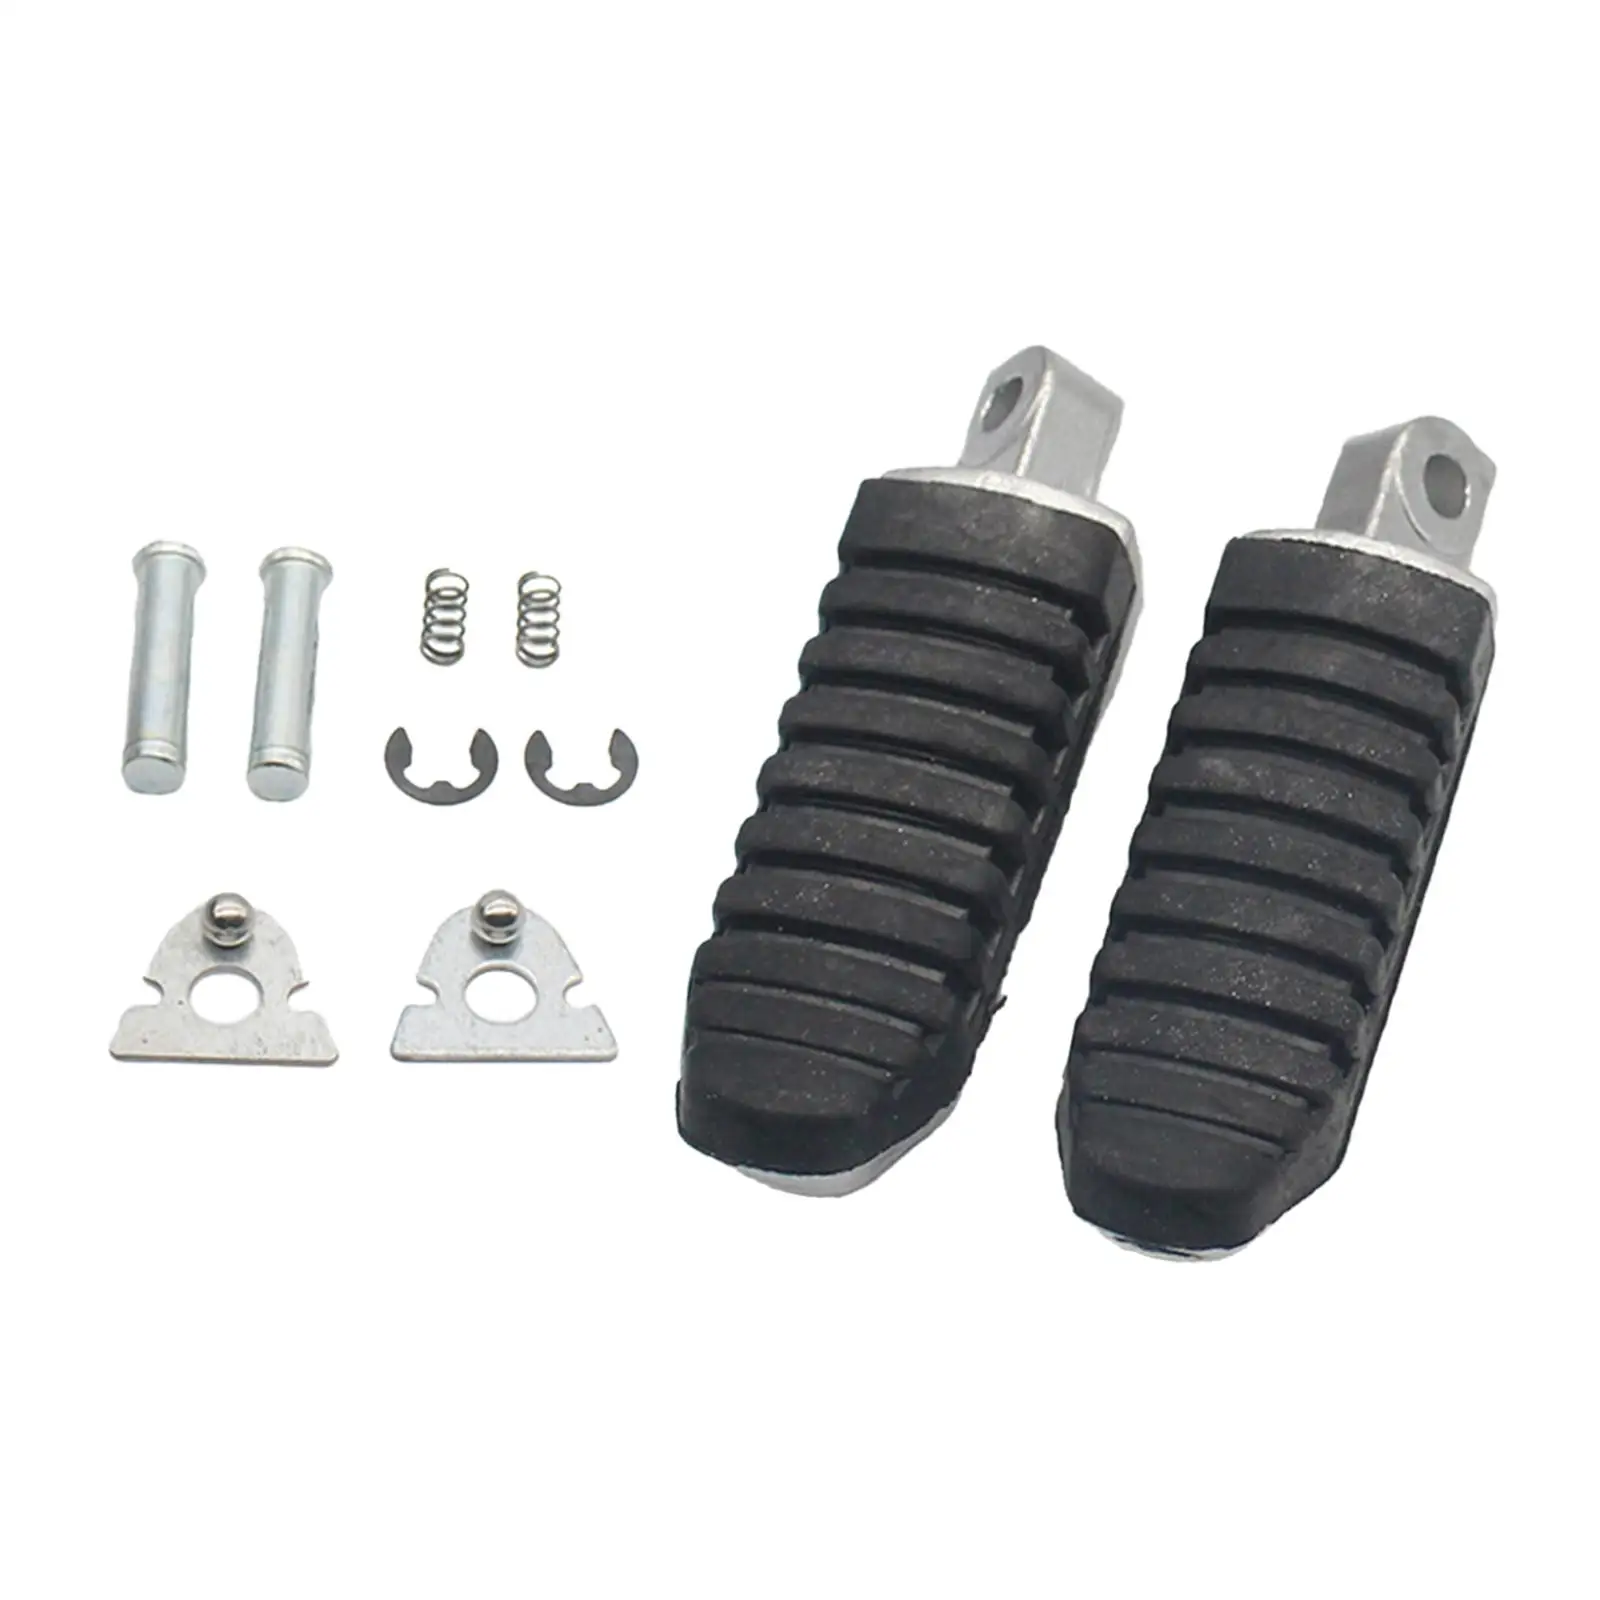 Motorcycle Foot Pegs Foot Rest Pedals Fit for Suzuki Parts High Performance